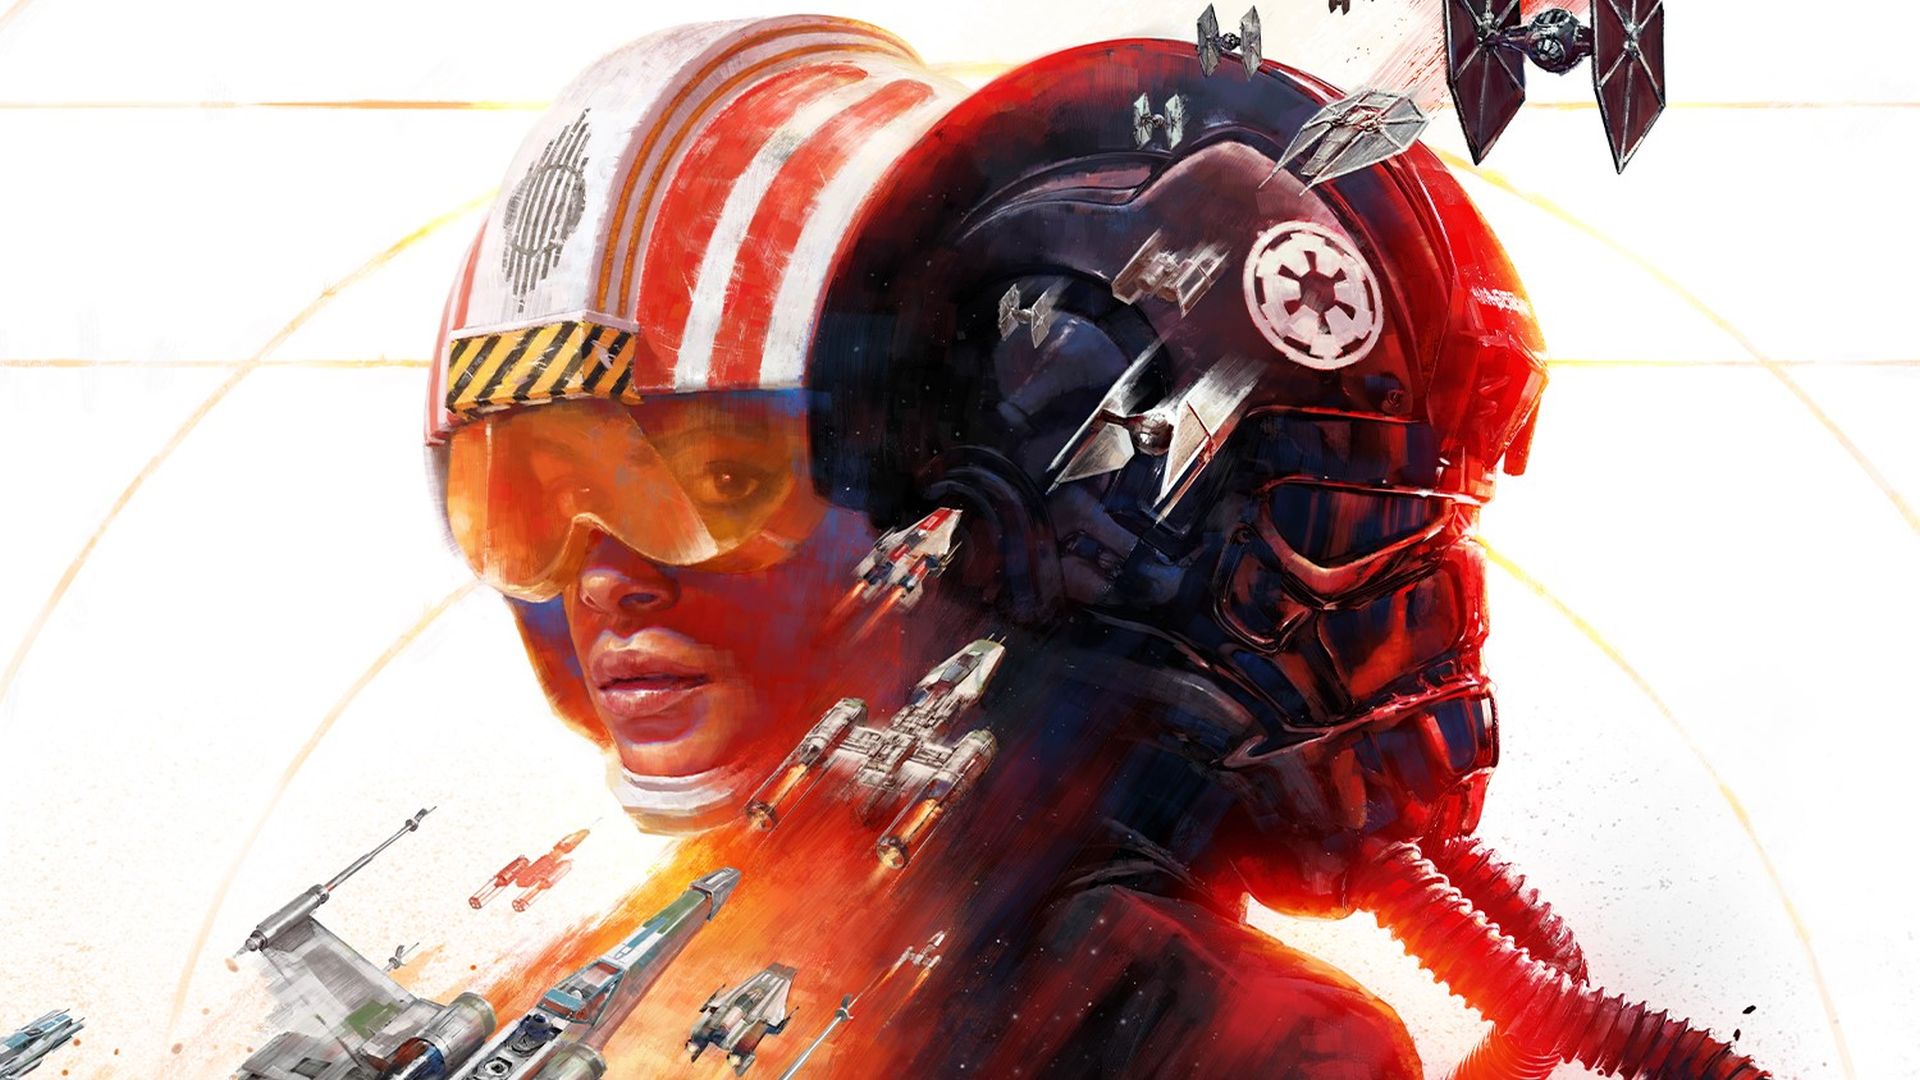 Now's your last chance to grab one of the best Star Wars games with Prime Gaming